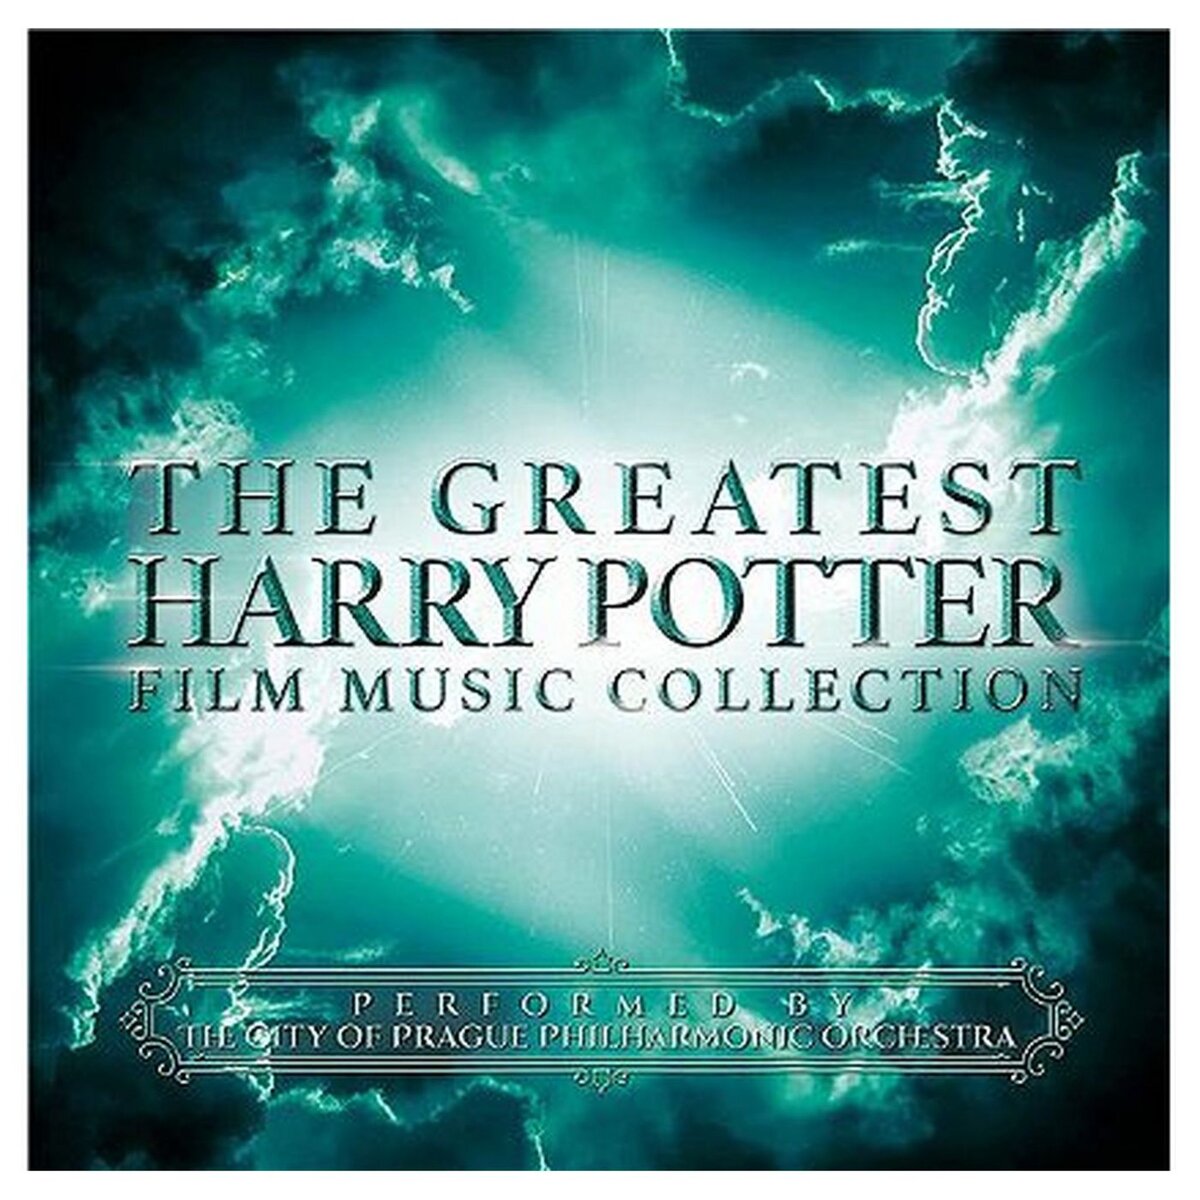 The Greatest Harry Potter Film Music Collection VINYLE pas cher 